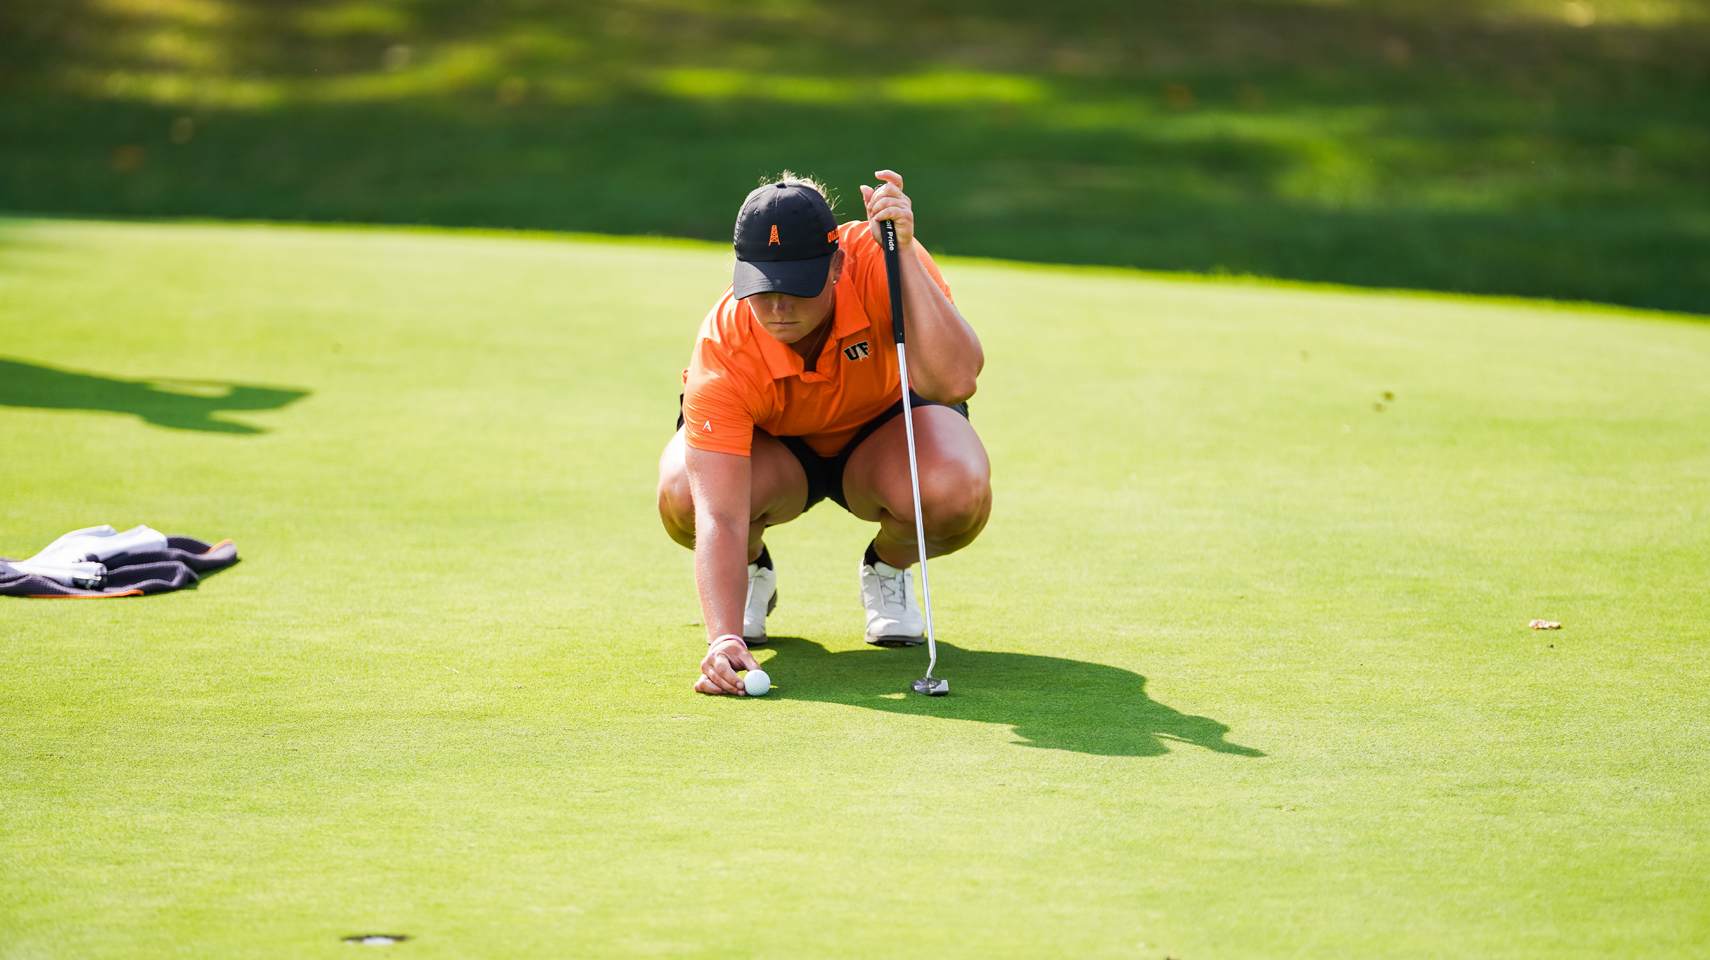 women's golfer in orange shirt placing the ball on the green for a putt